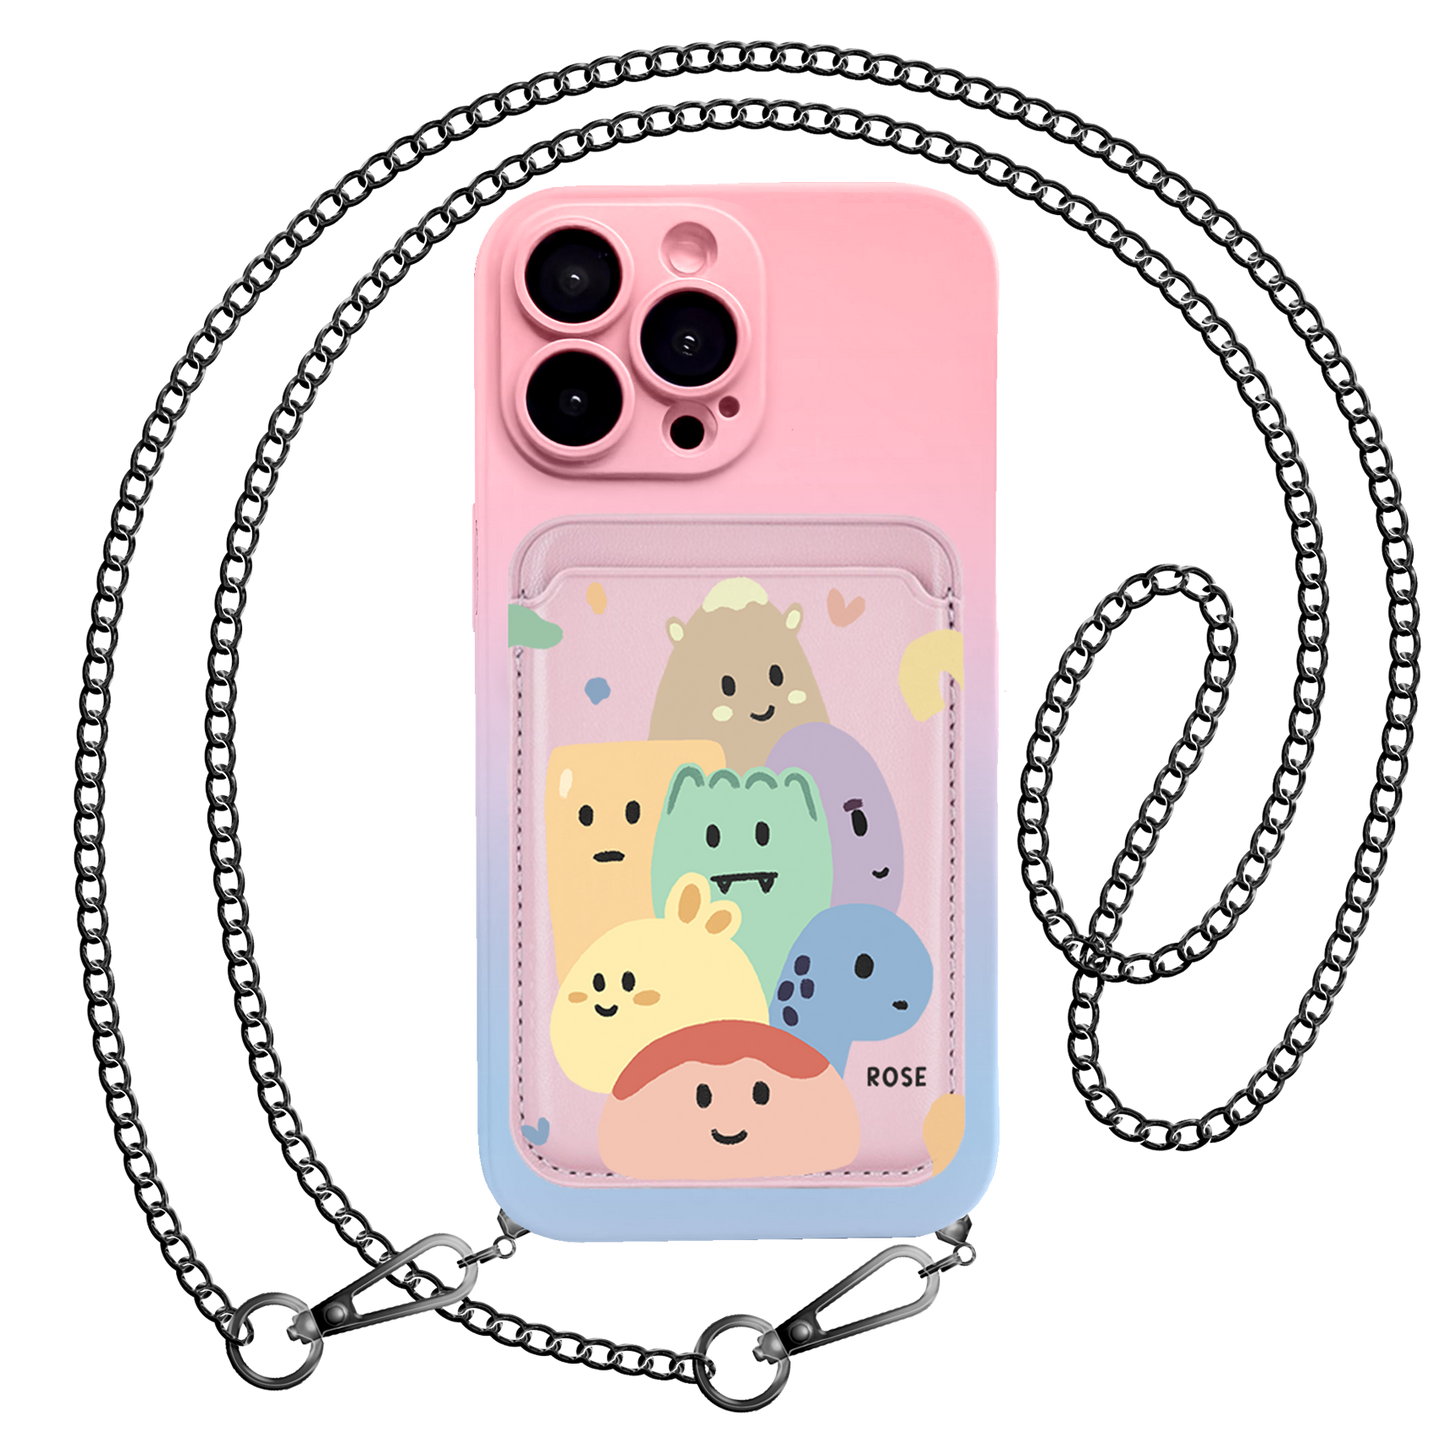 iPhone Magnetic Wallet Silicone Case - Doodle 2.0